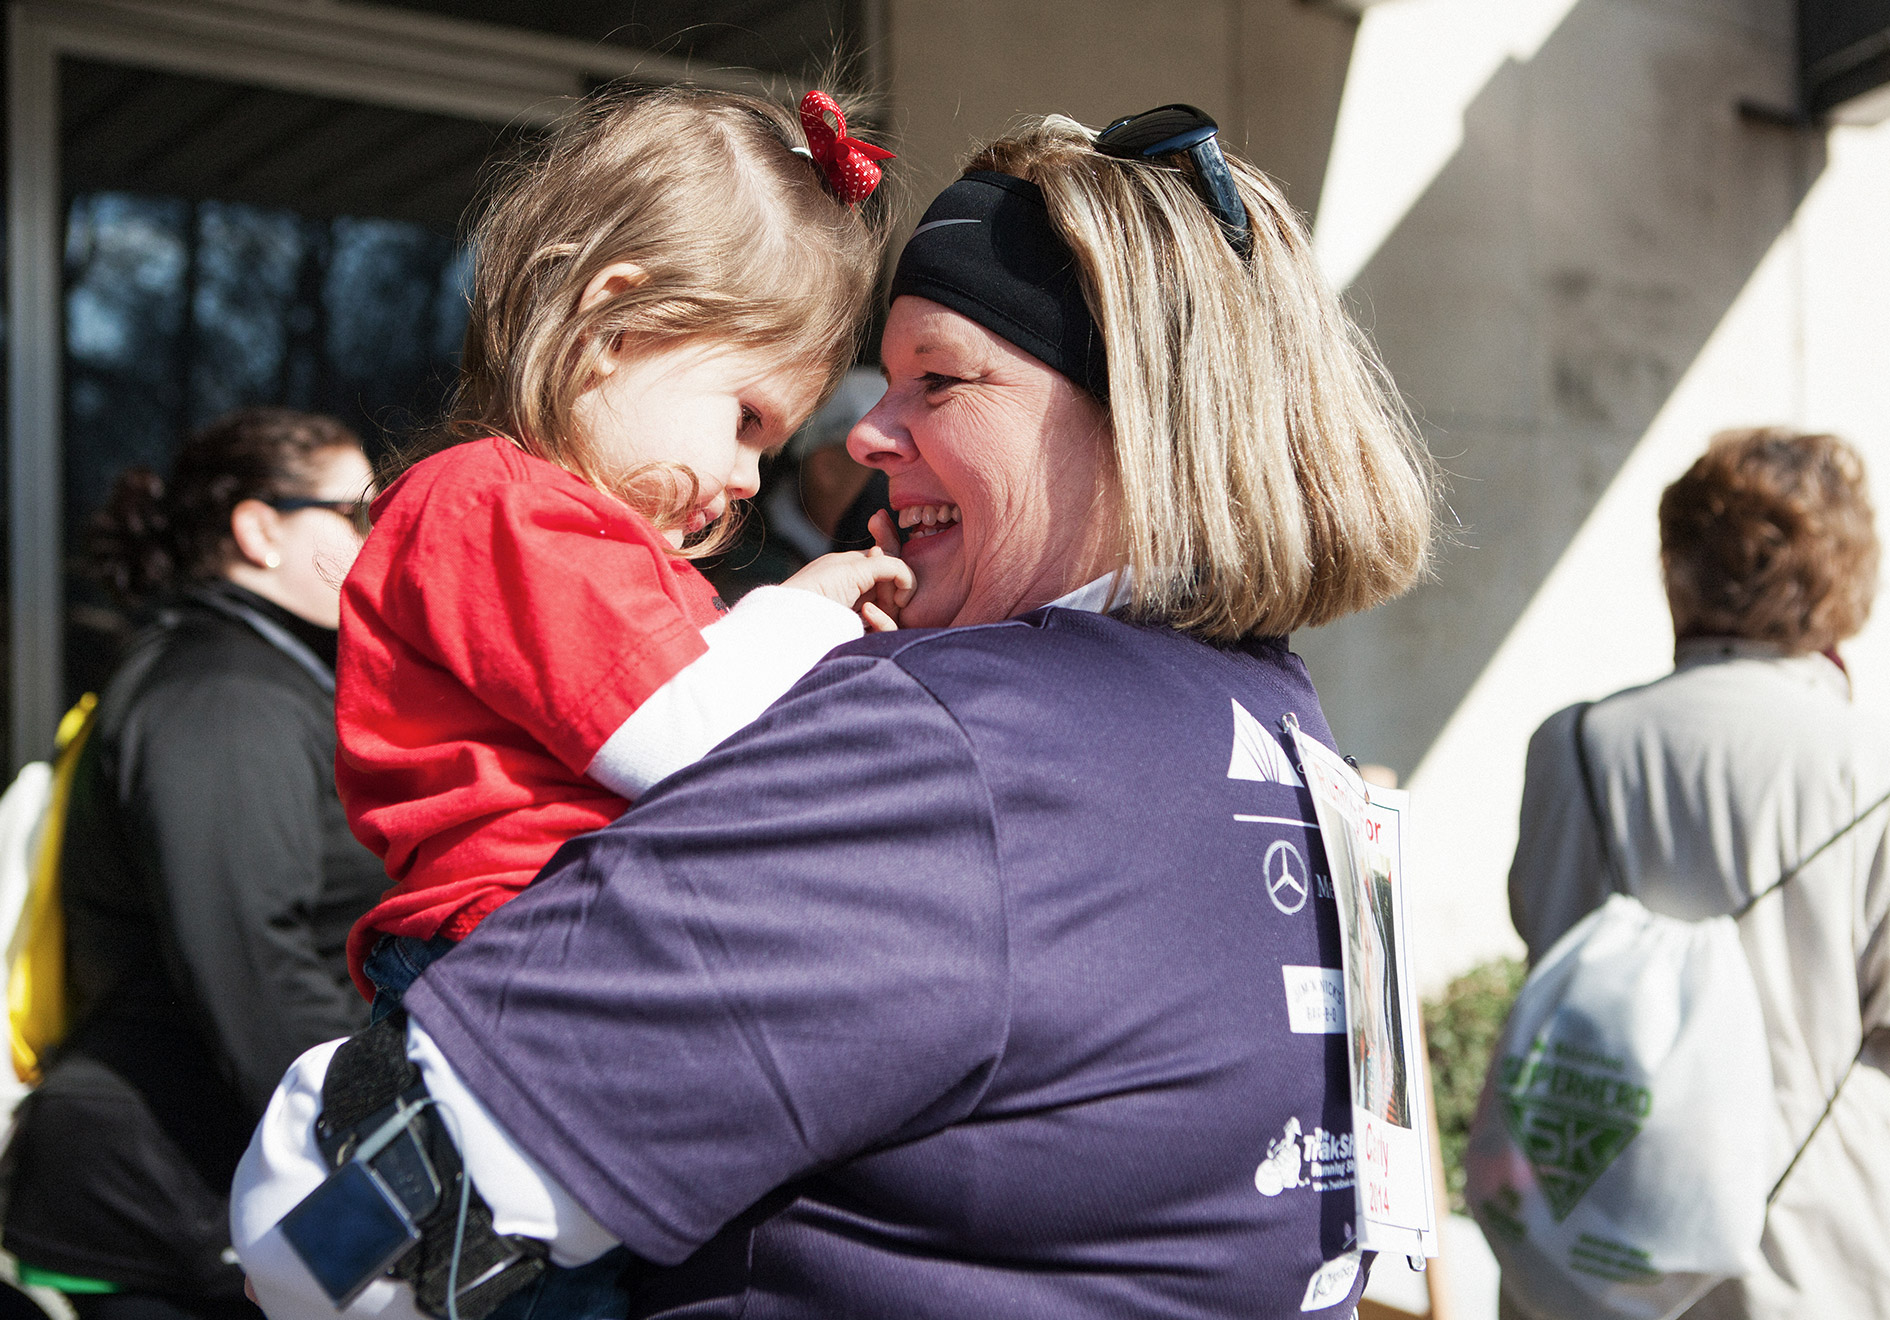 Carly Chandler and and her grandmother, Denise Hill, celebrate the Regions Superhero 5k Run